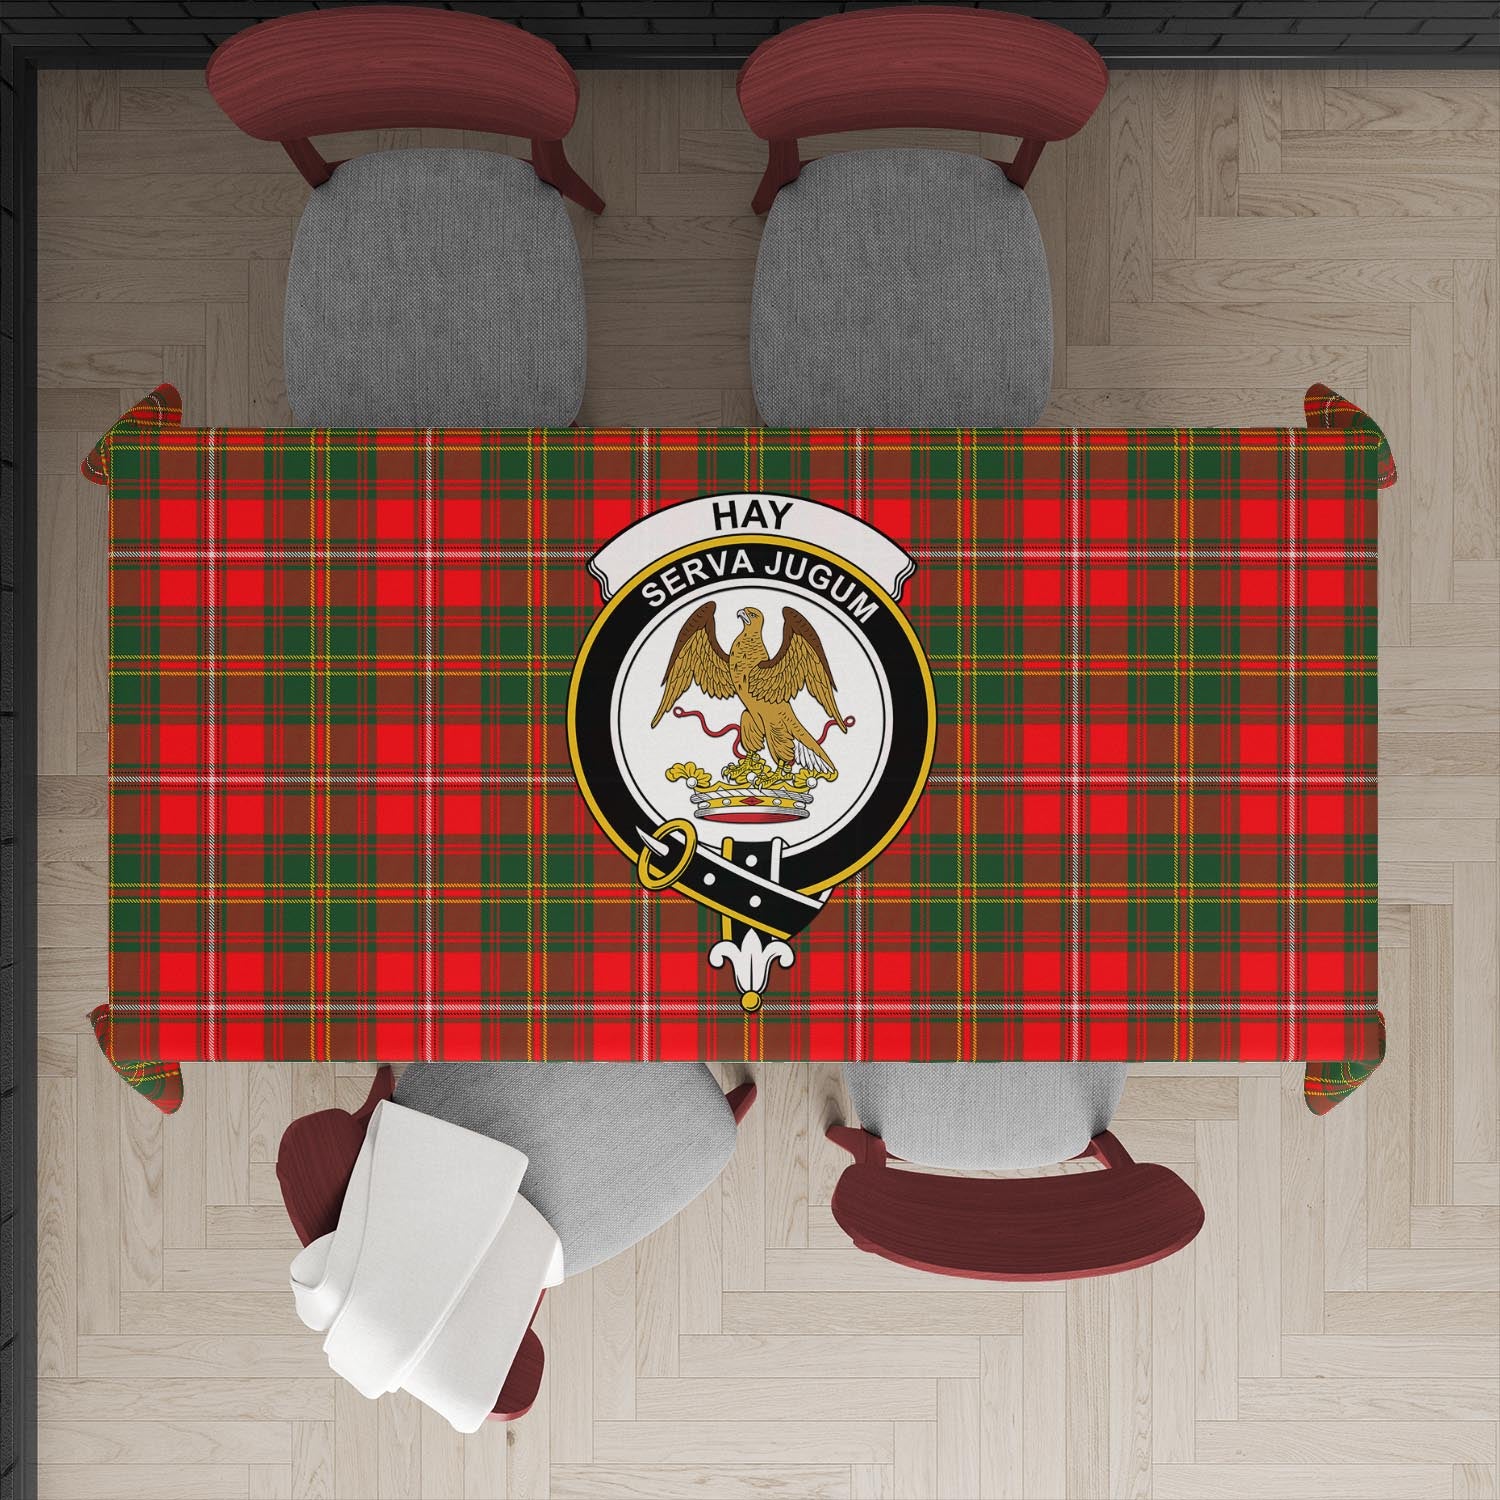 hay-modern-tatan-tablecloth-with-family-crest